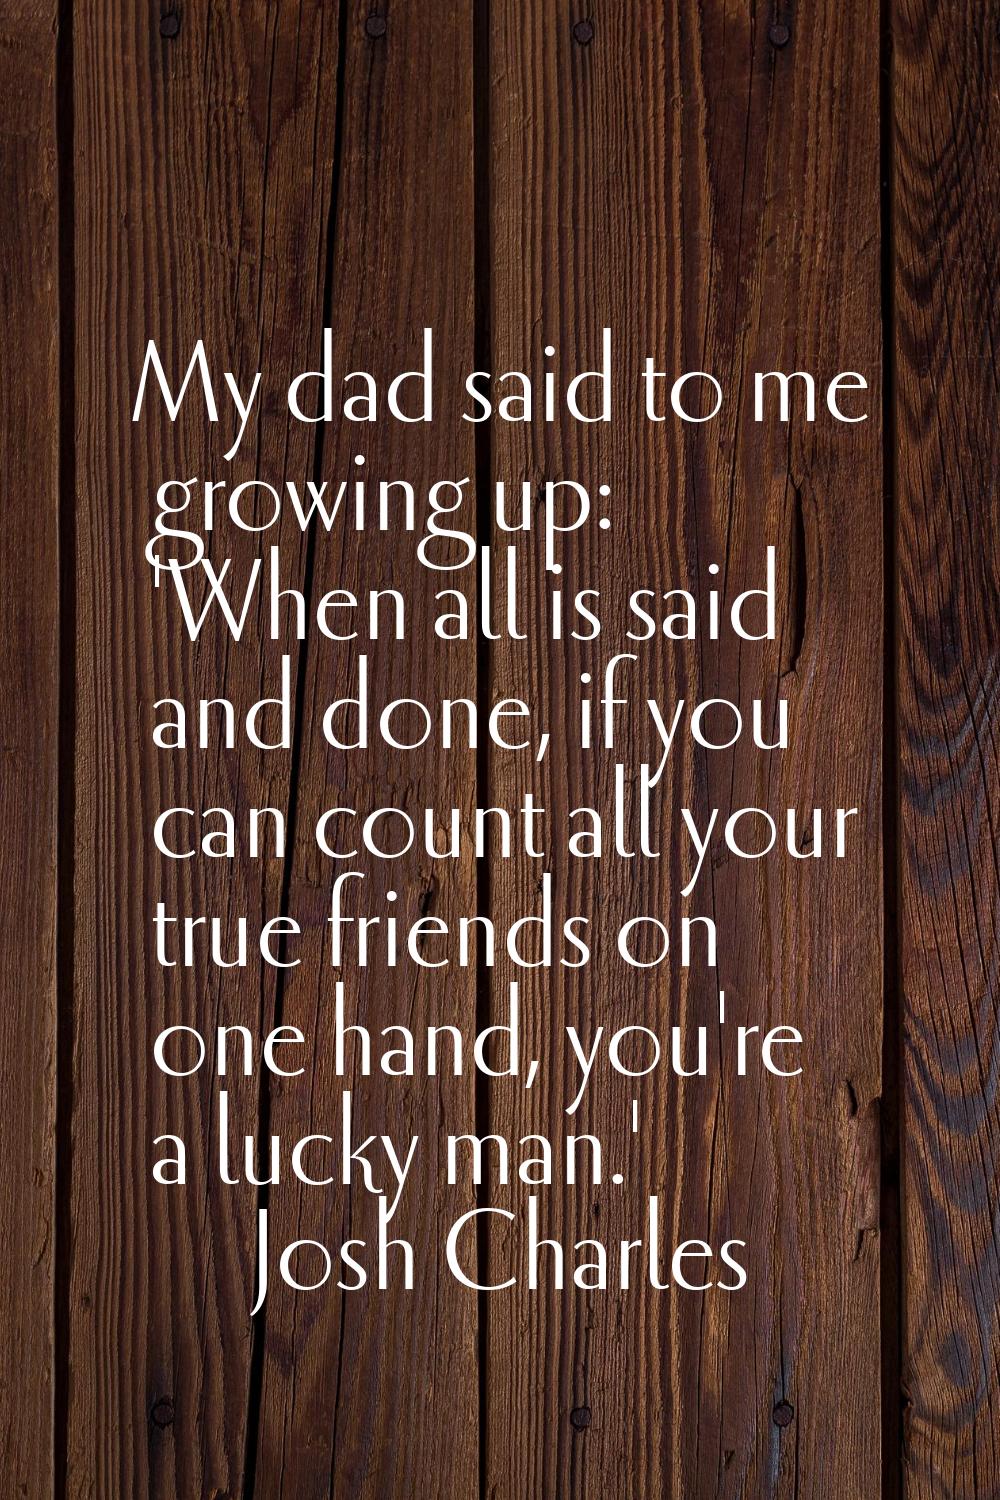 My dad said to me growing up: 'When all is said and done, if you can count all your true friends on